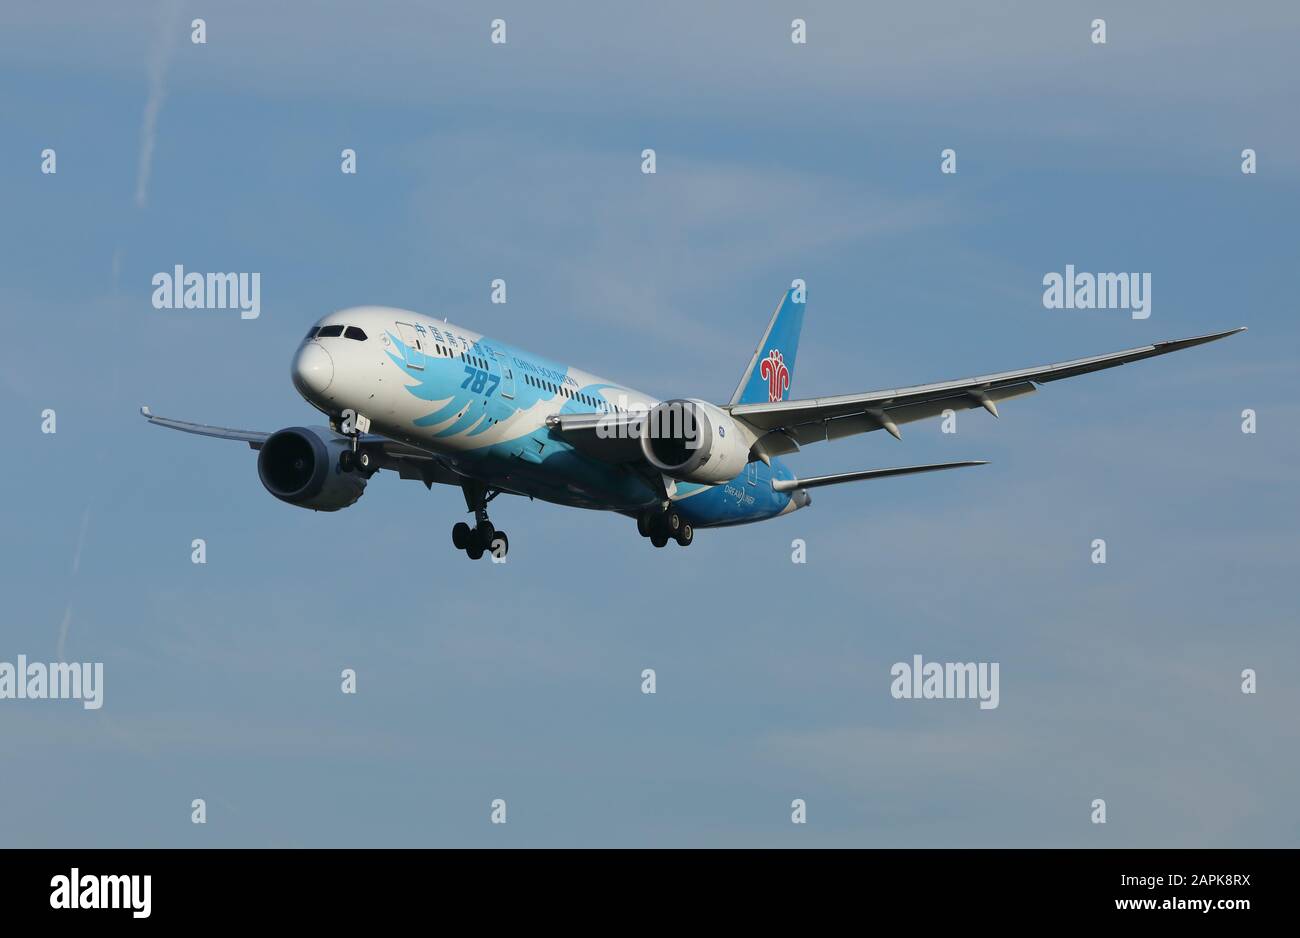 A China Southern Airlines Boeing 787 Dreamliner passenger aircraft landing at Heathrow airport, London, UK. Stock Photo